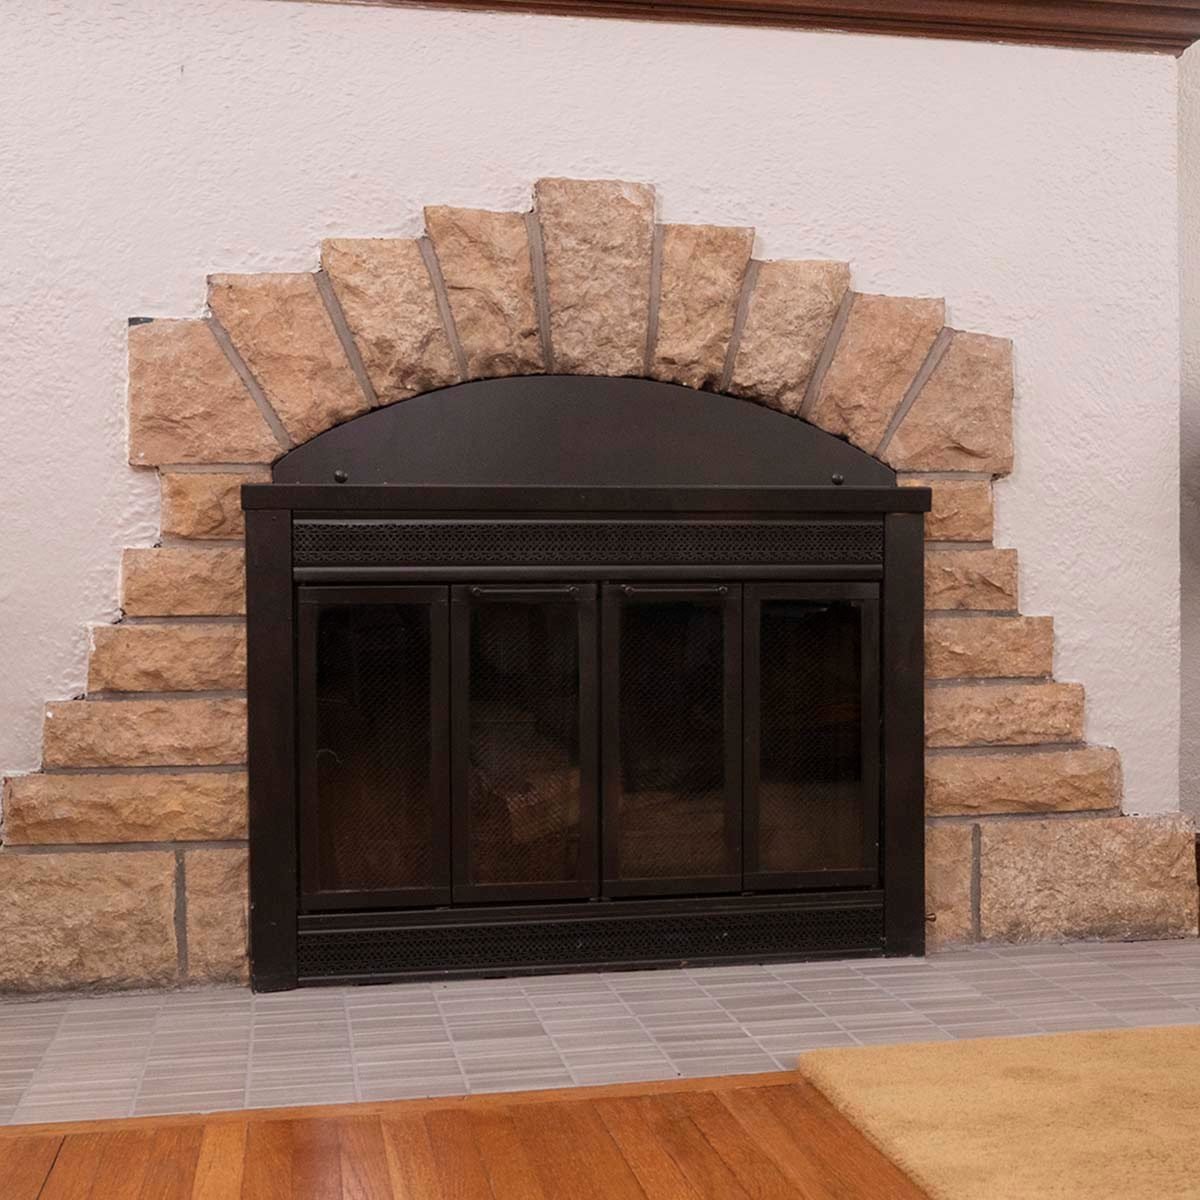 How to Inspect a Wood Burning Fireplace Yourself